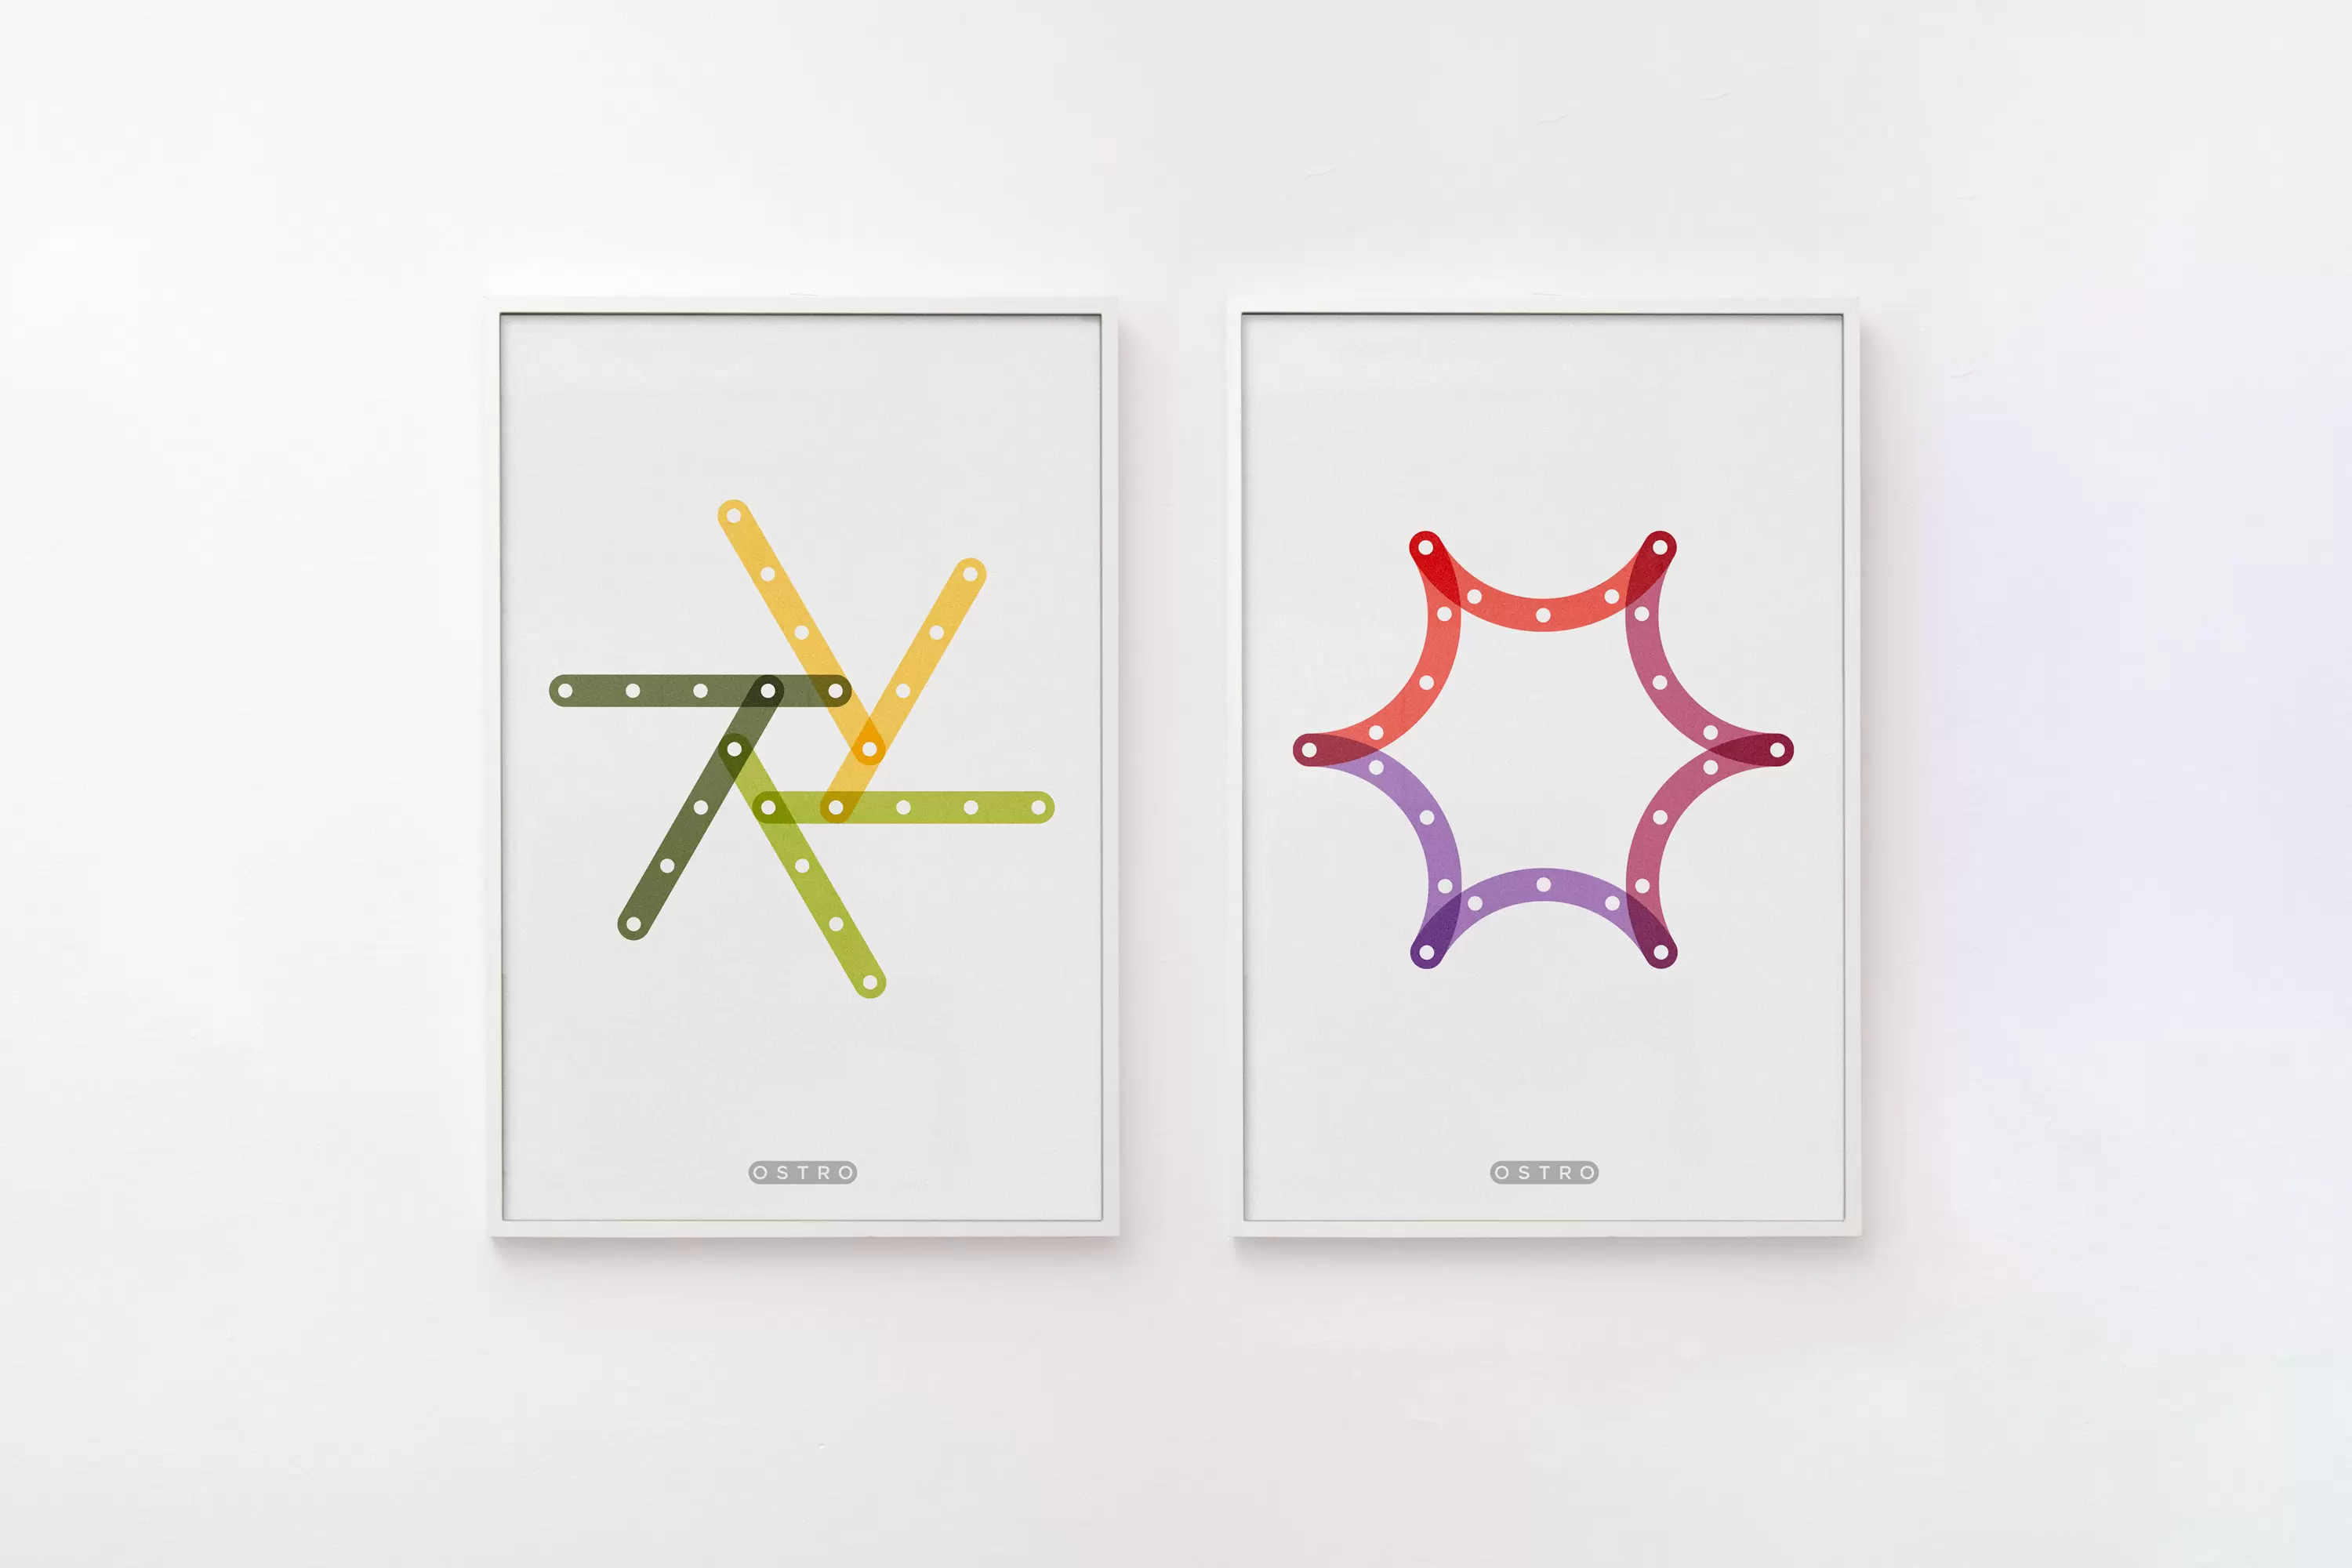 Signage and artworks designed by Mucho for American life science software company Ostro.